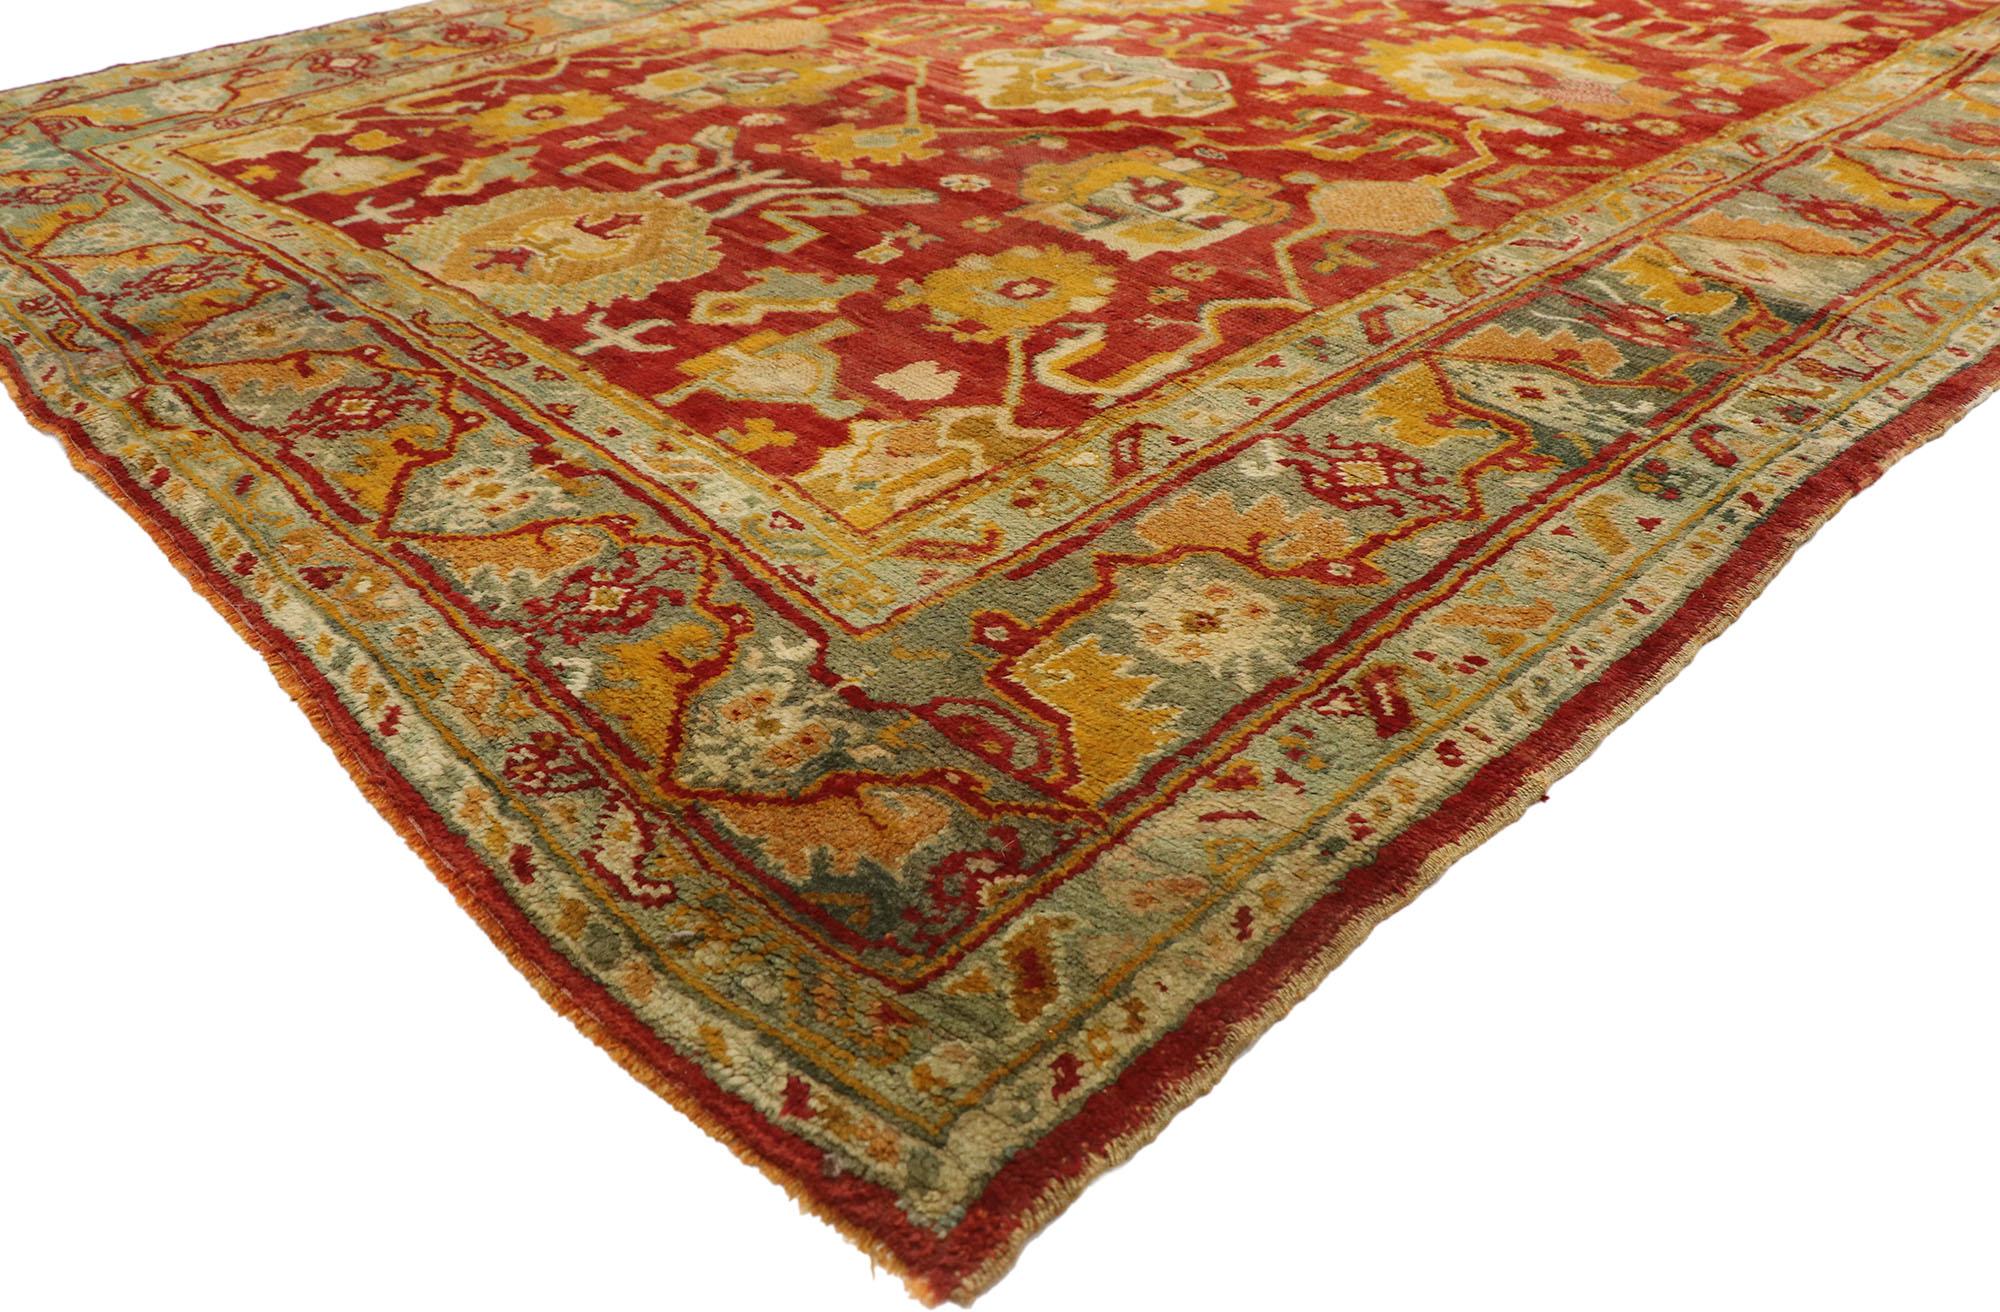 77155 antique Turkish Oushak Palace Gallery rug with Luxe Arts & Crafts style 06'09 x 32'01. The architectural elements of naturalistic forms combined with Arts & Crafts style, this hand knotted wool antique Turkish Oushak palace gallery rug